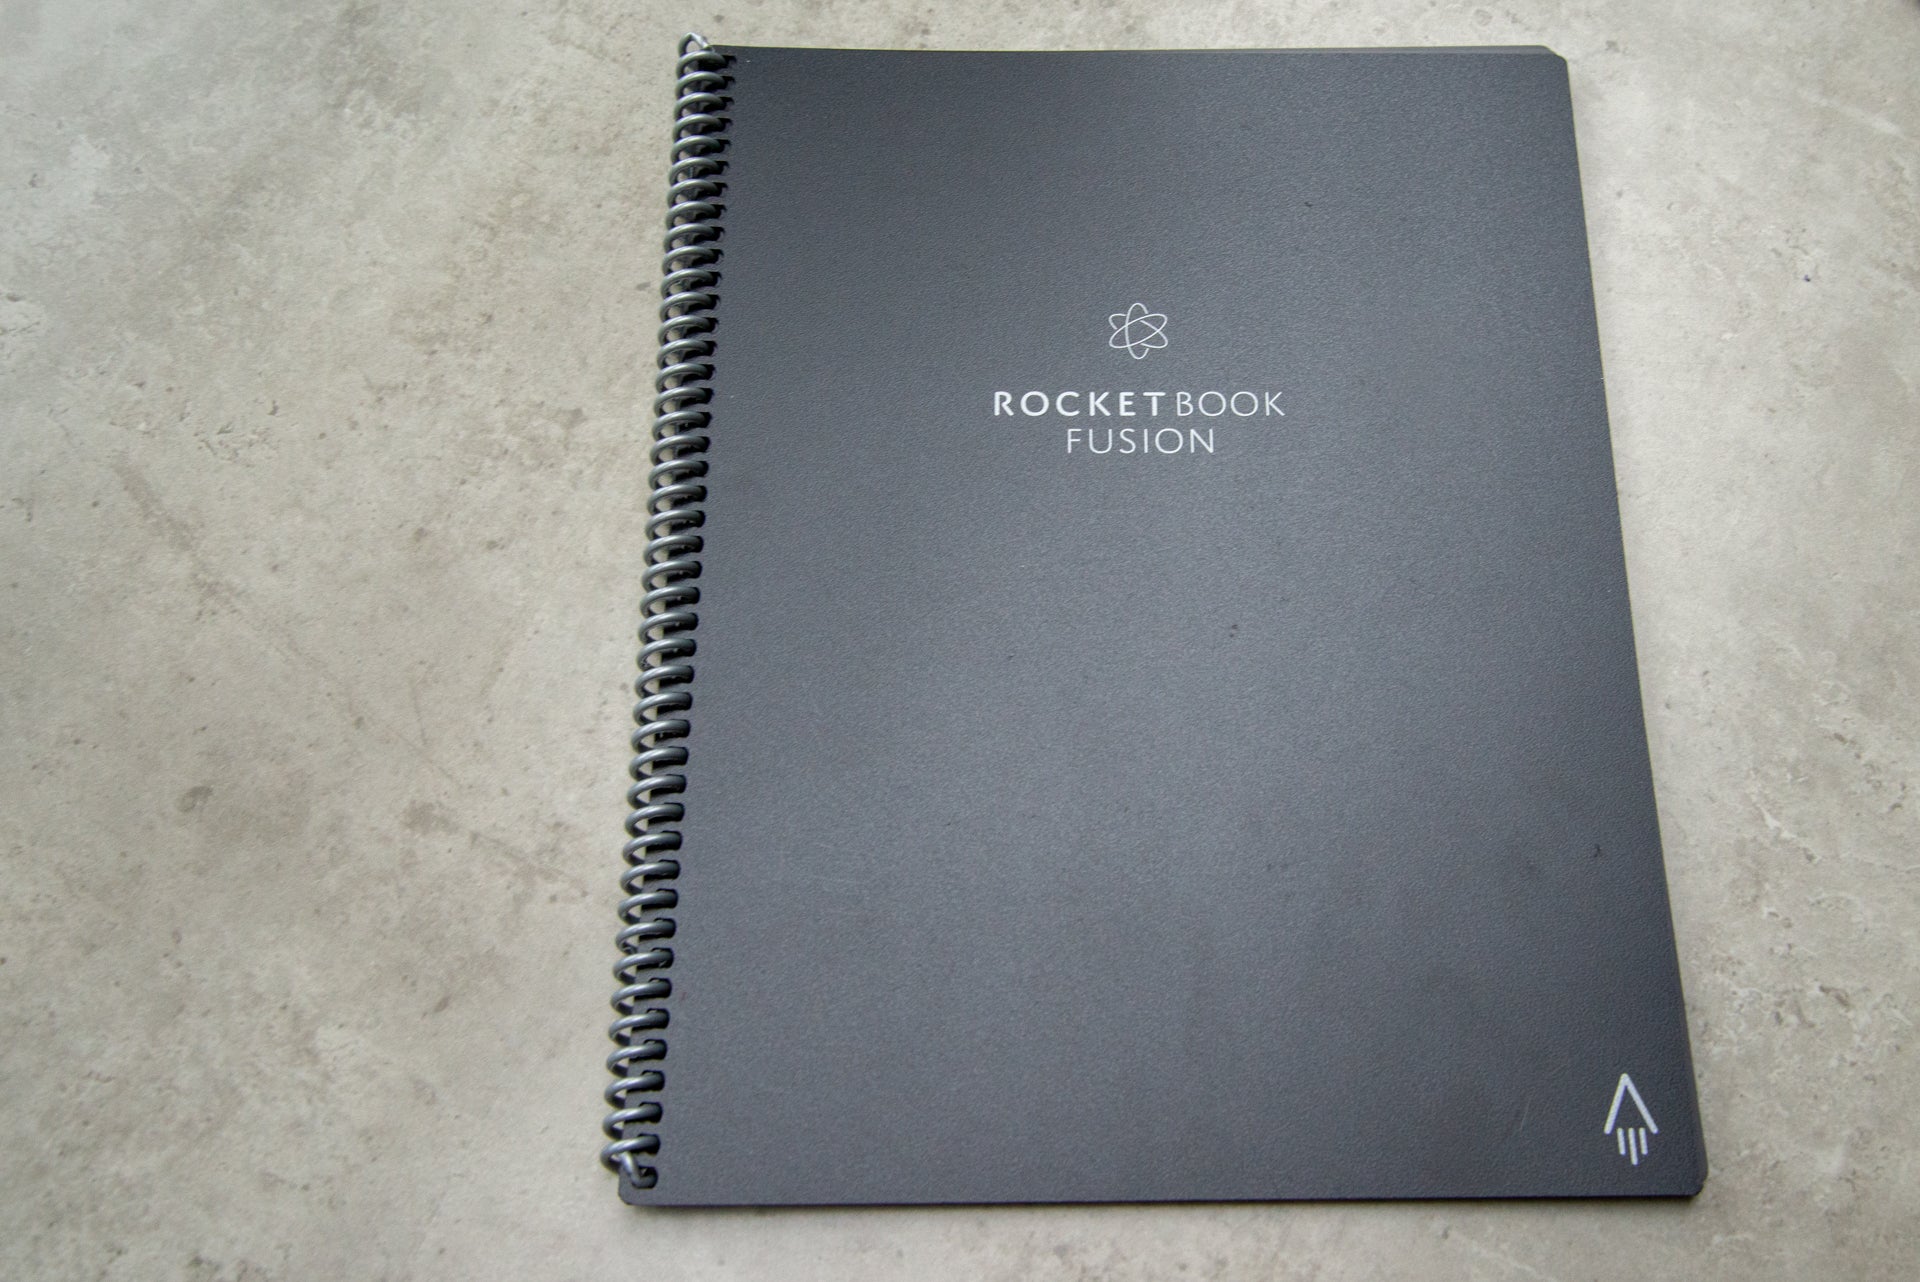 Rocketbook Fusion front cover